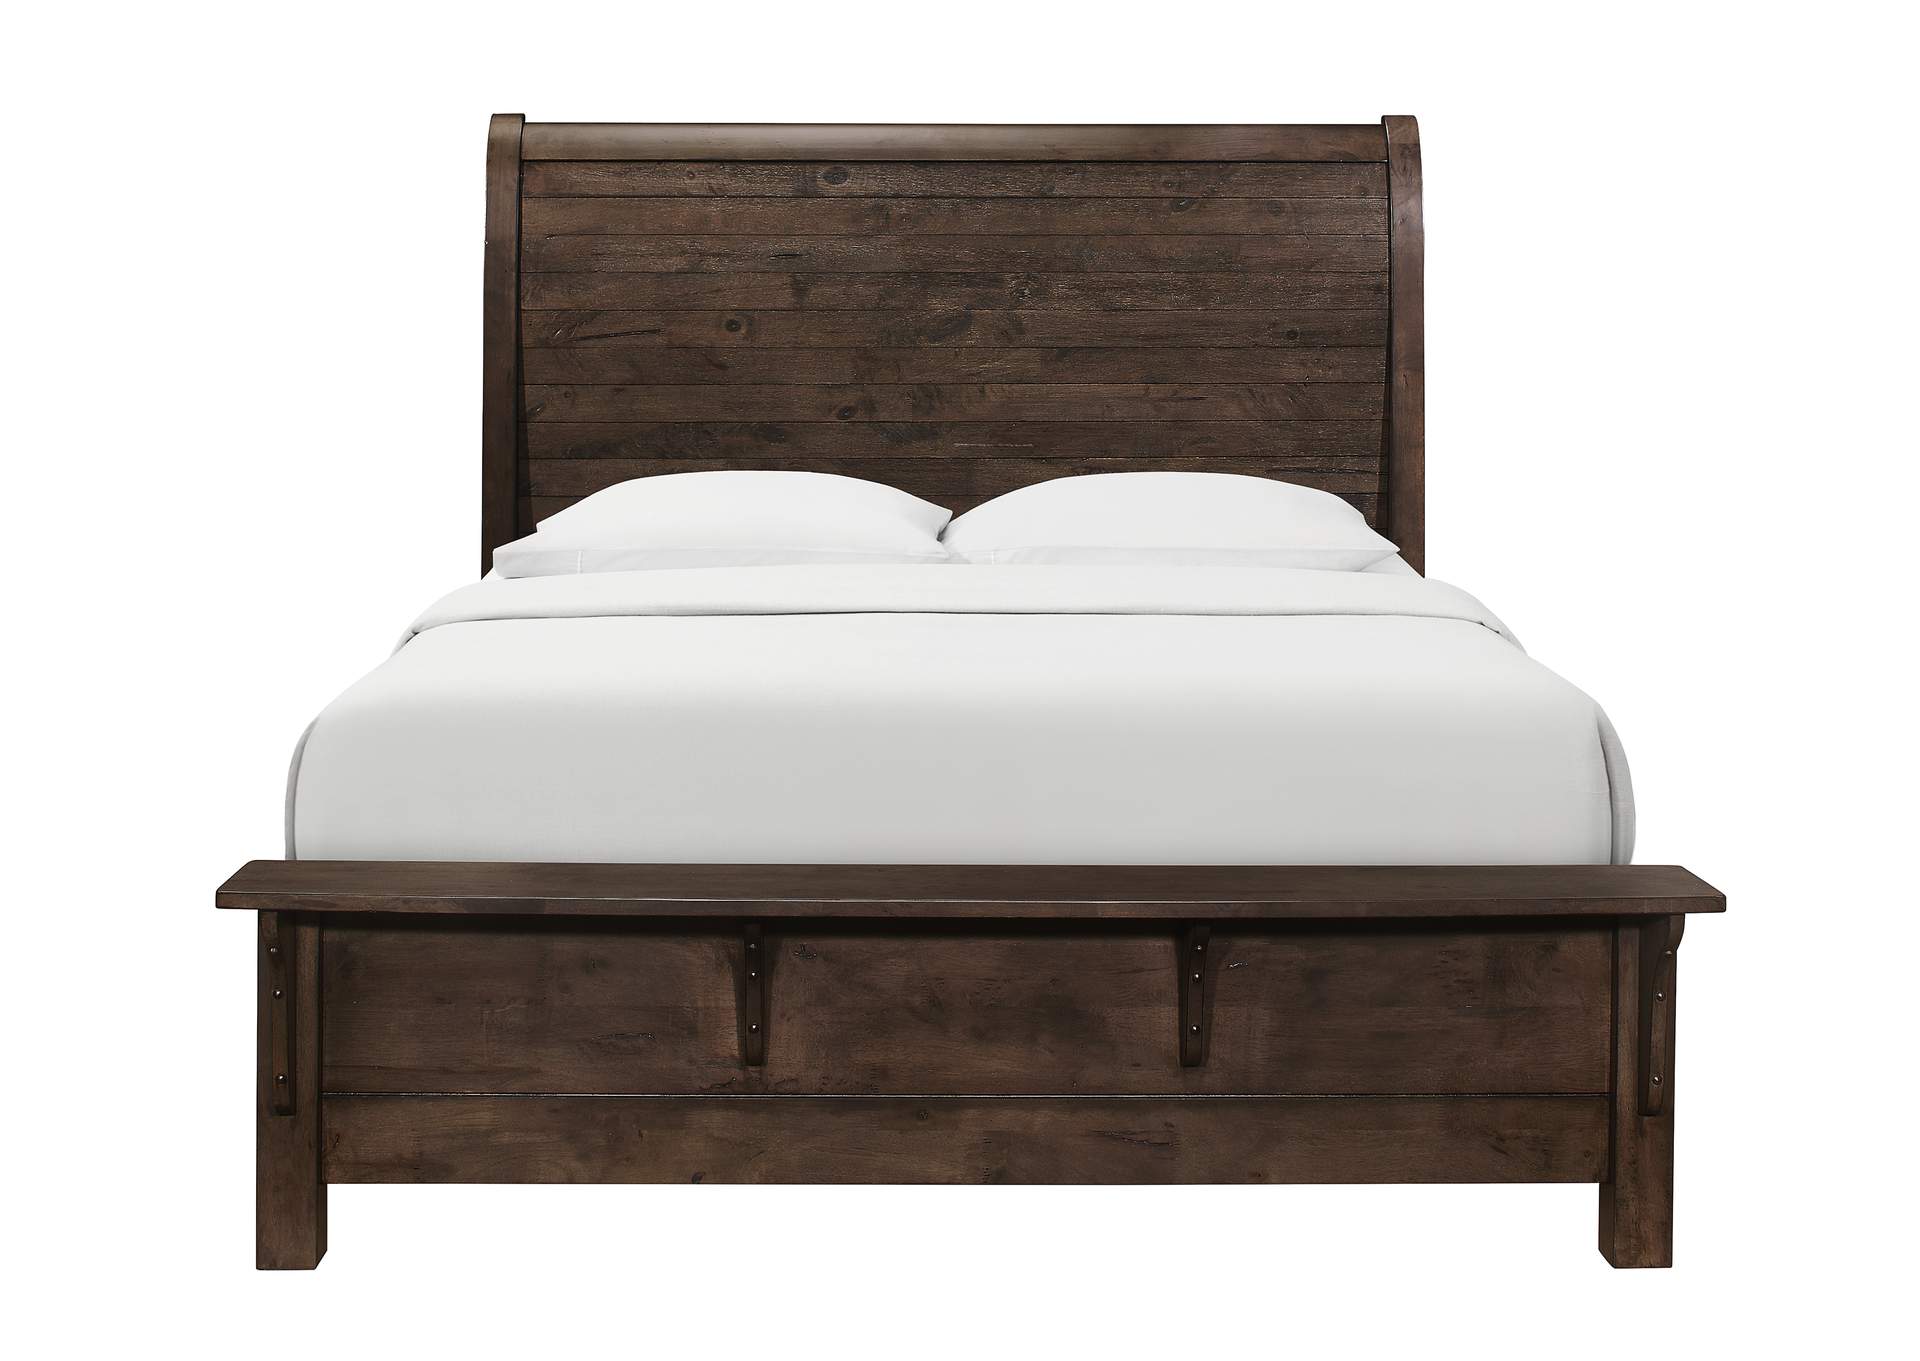 Ashton Hills Queen Bed,Emerald Home Furnishings